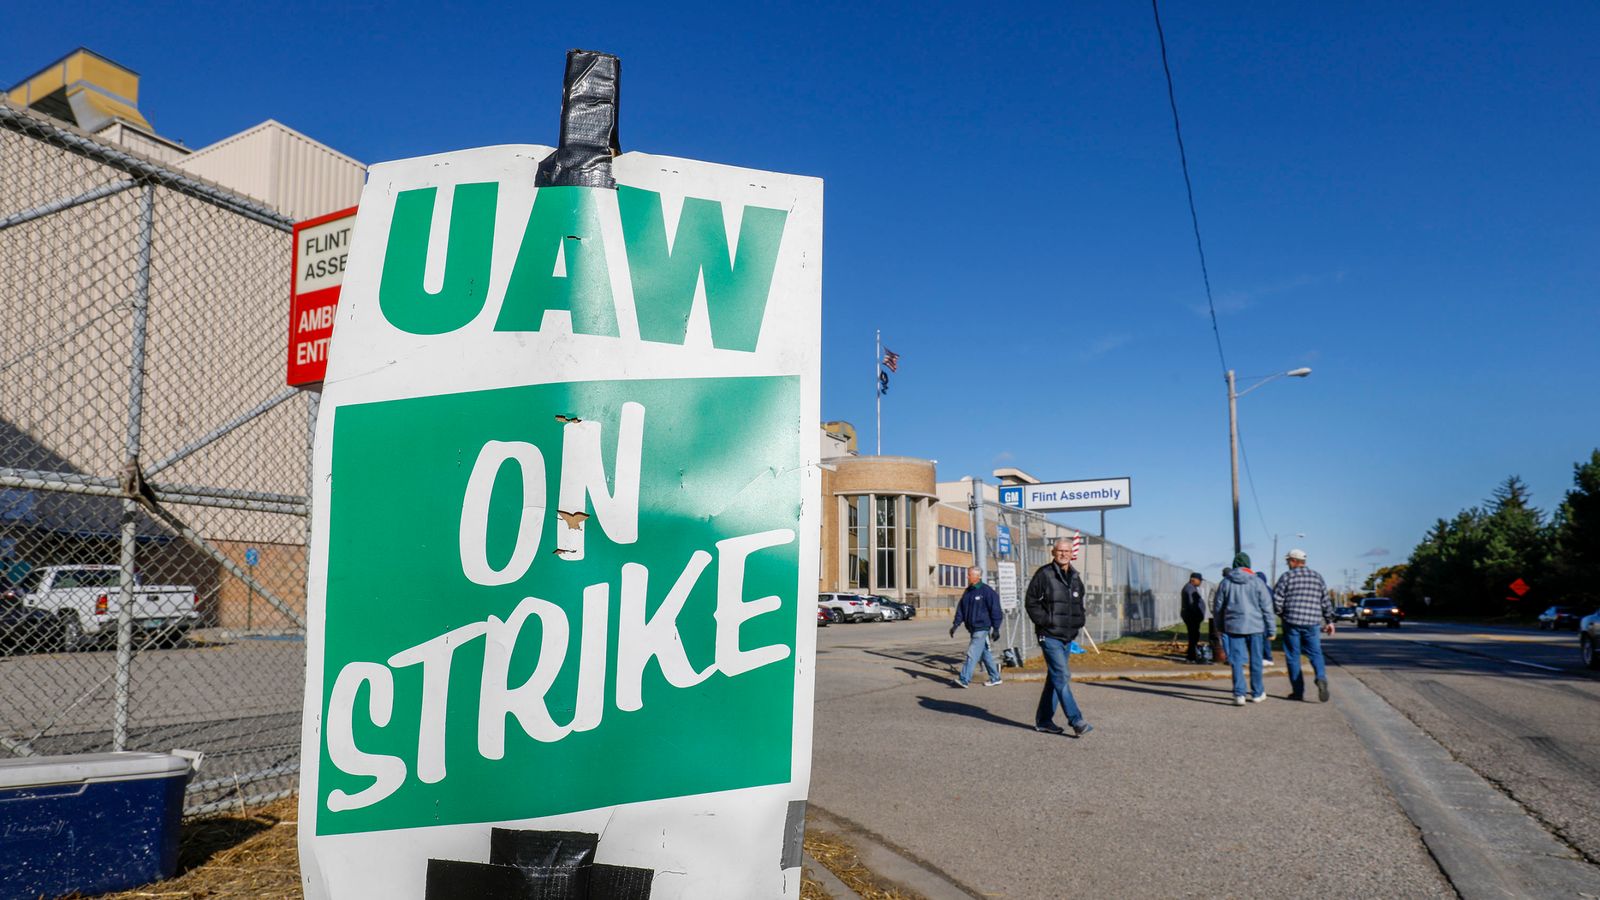 UAW union to launch coordinated strikes against General Motors, Ford and Stellantis